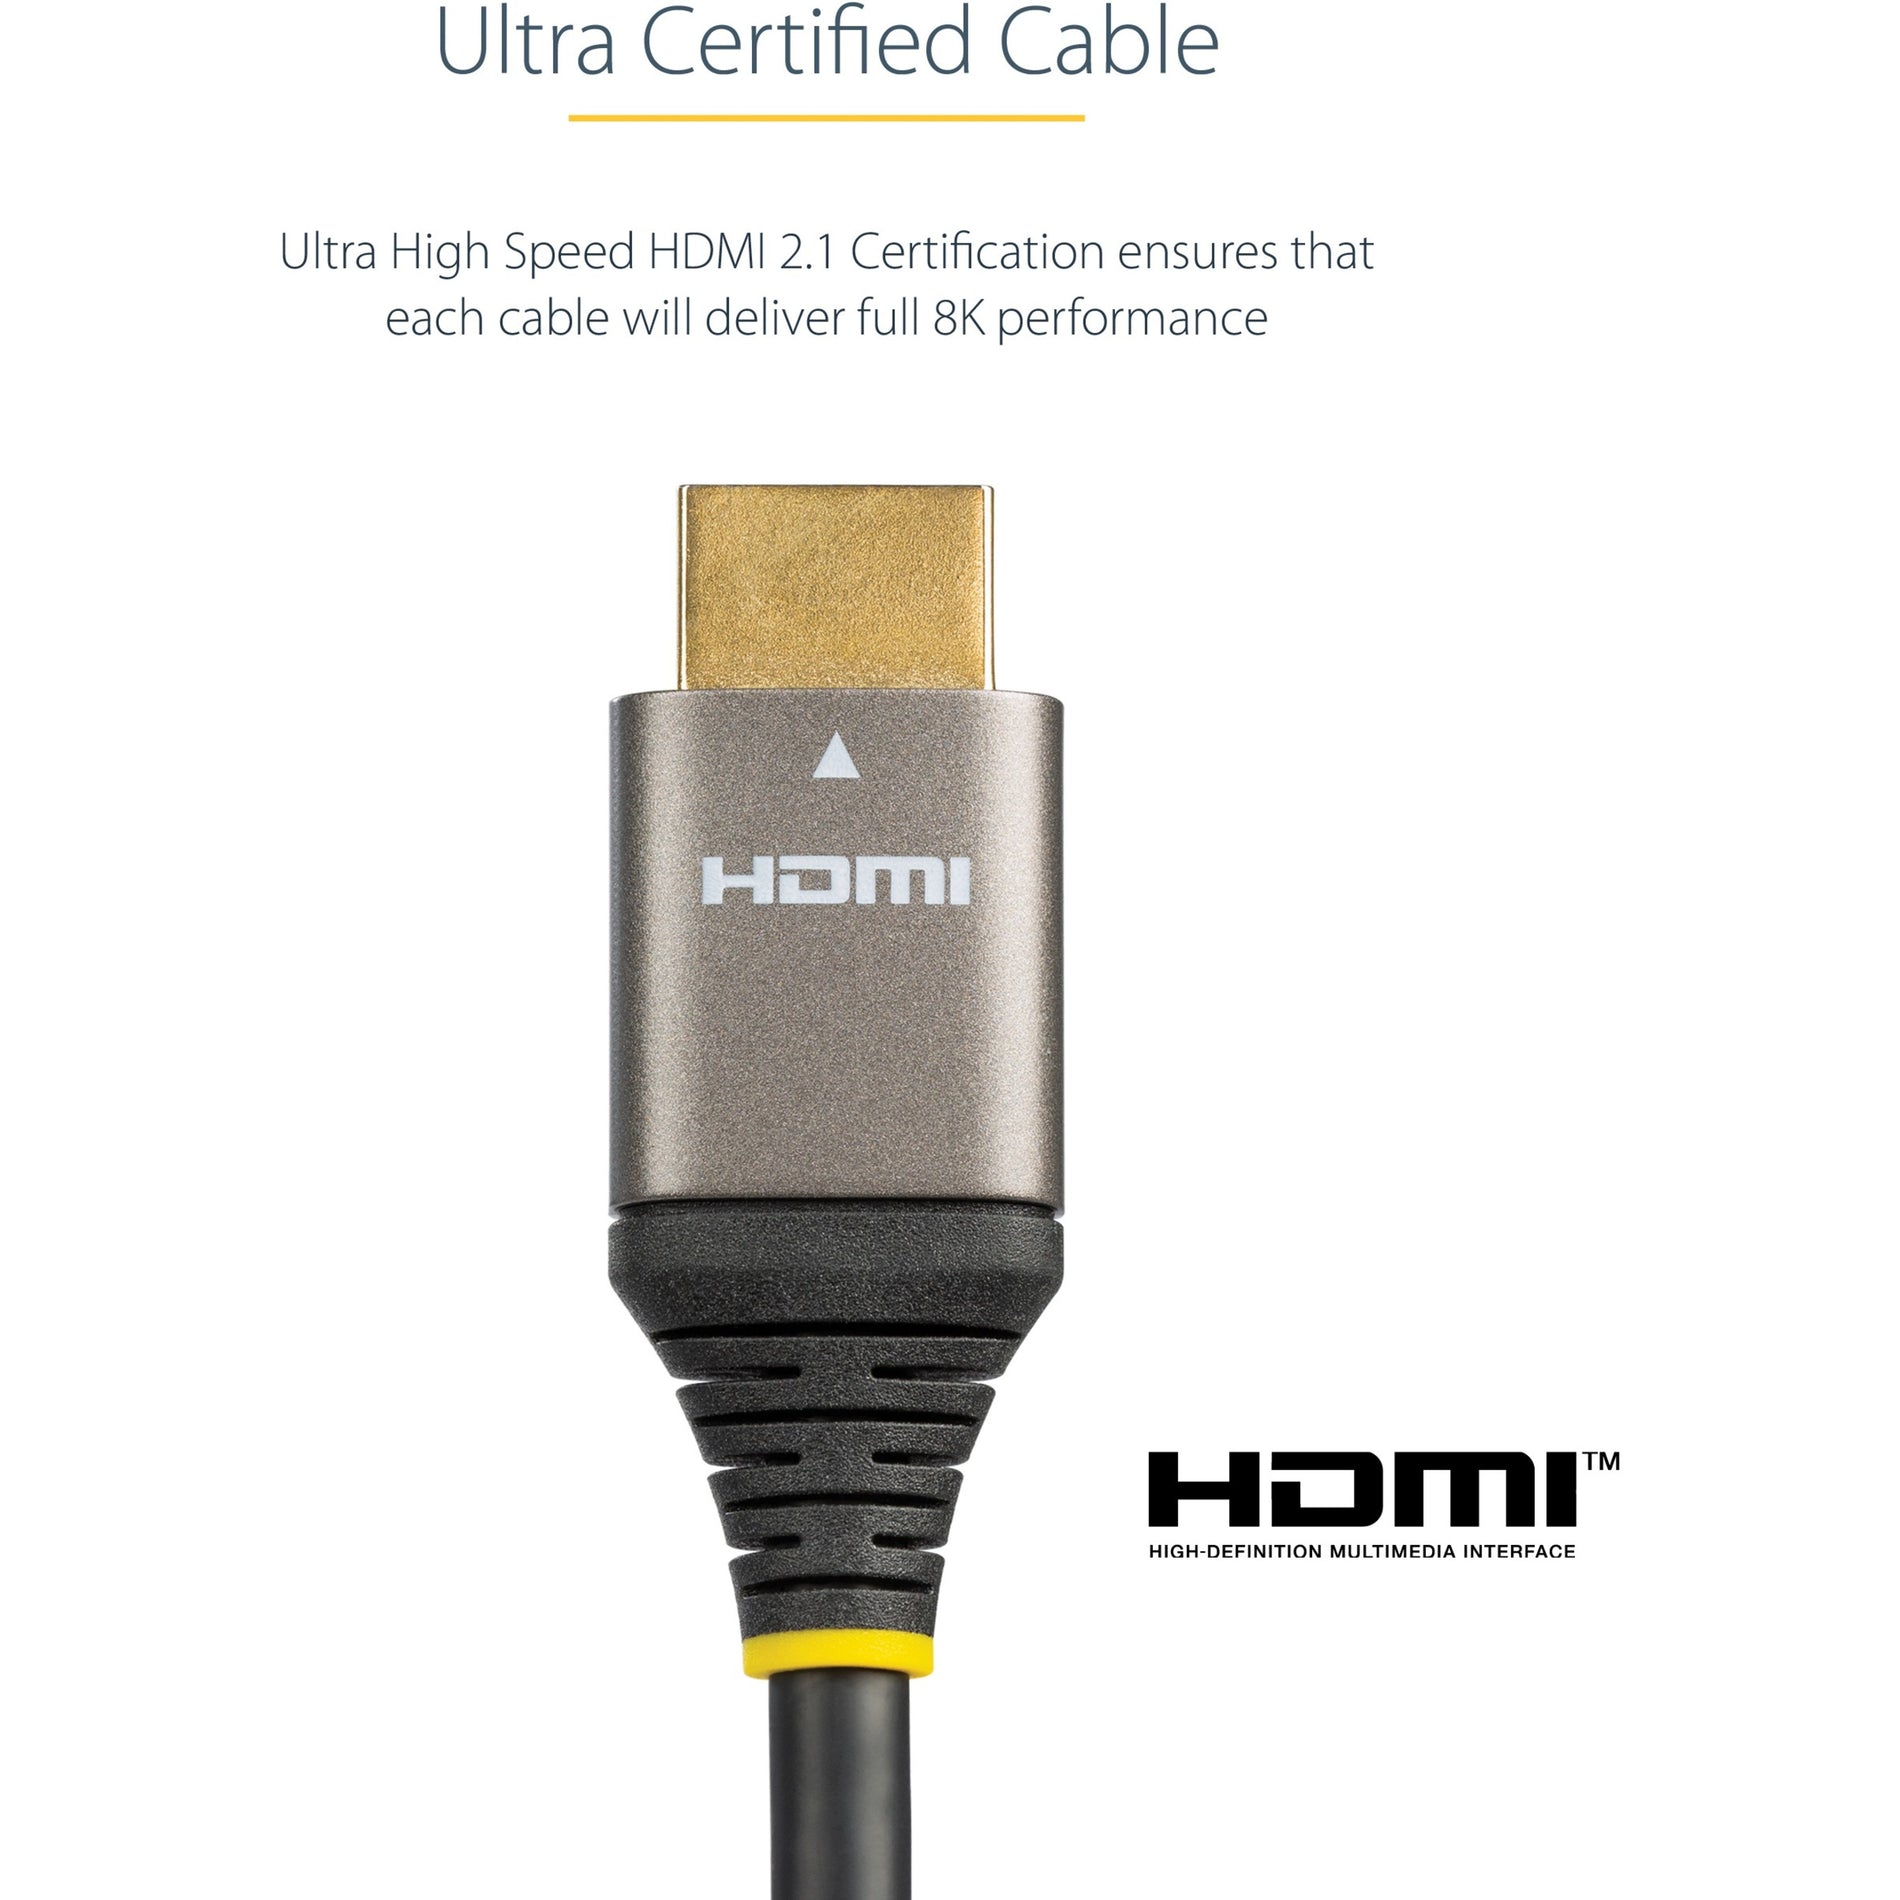 StarTech.com HDMM21V1M Ultra High Speed HDMI Cable, 3ft/1m, 8K 60Hz/4K 120Hz HDR10+, Certified 48Gbps